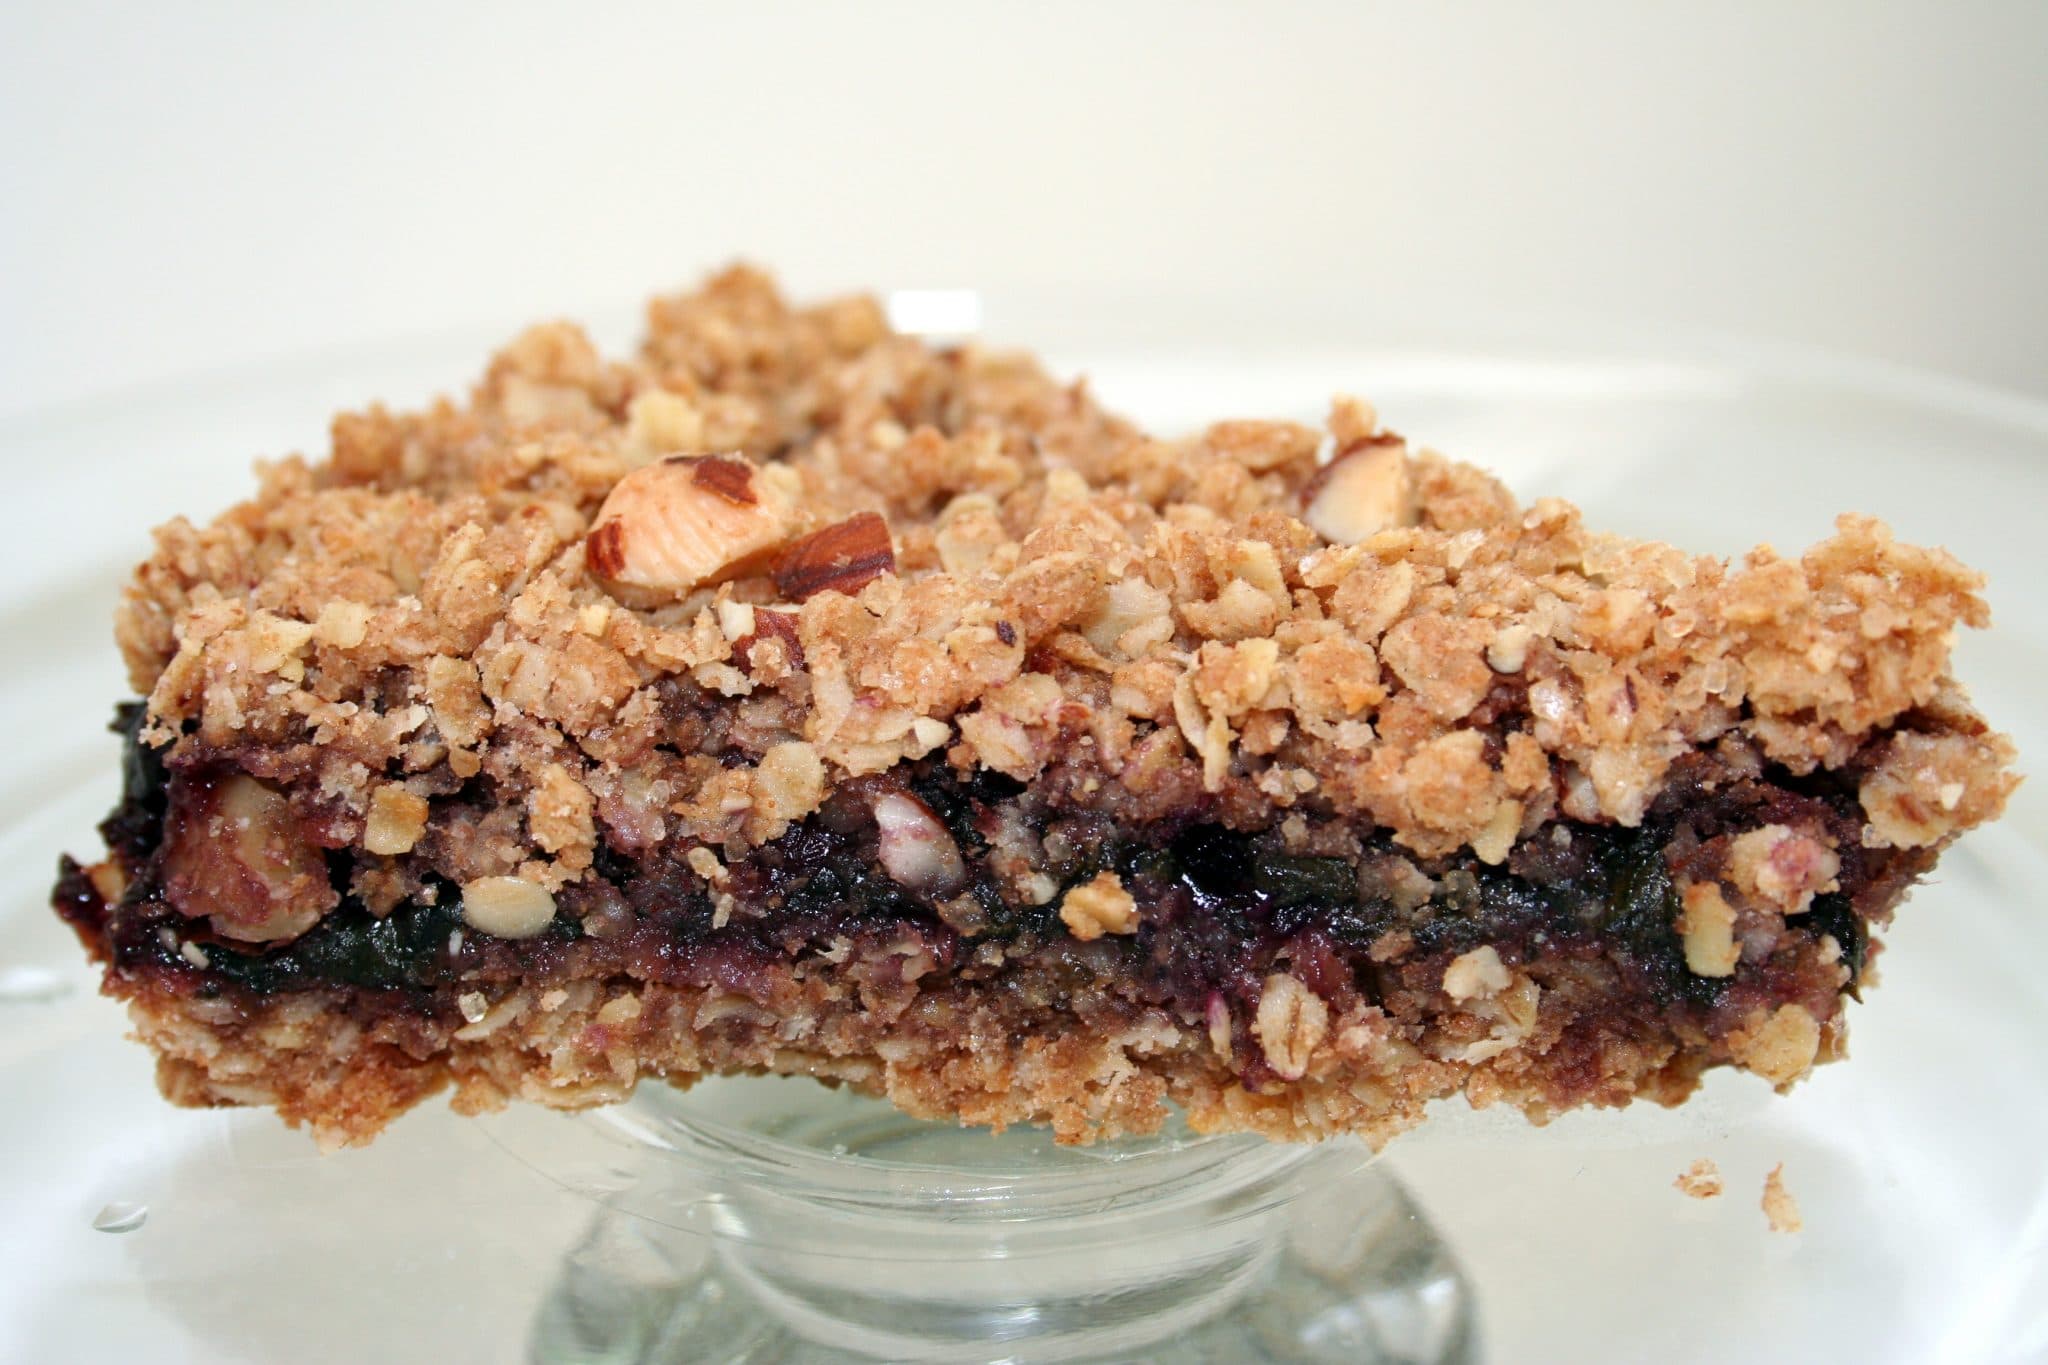 Vegan Blueberry Crumble Bars with Spinach on a plat, cut in half to show filling